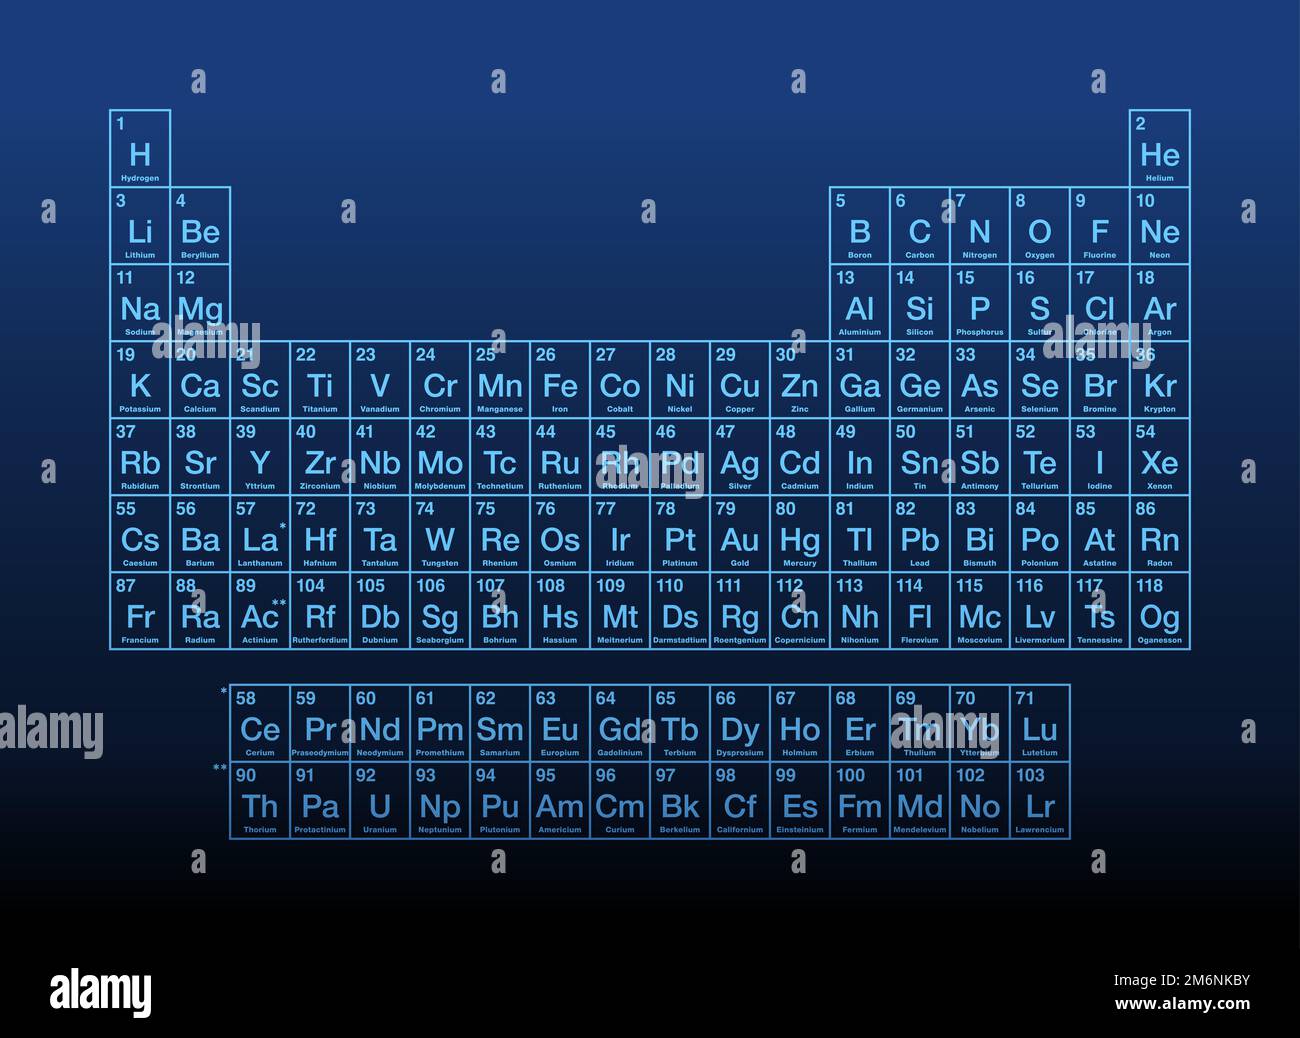 Periodic table of the elements. Blue colored periodic table of the chemical elements on dark blue background. Tabular display of 118 known elements. Stock Photo